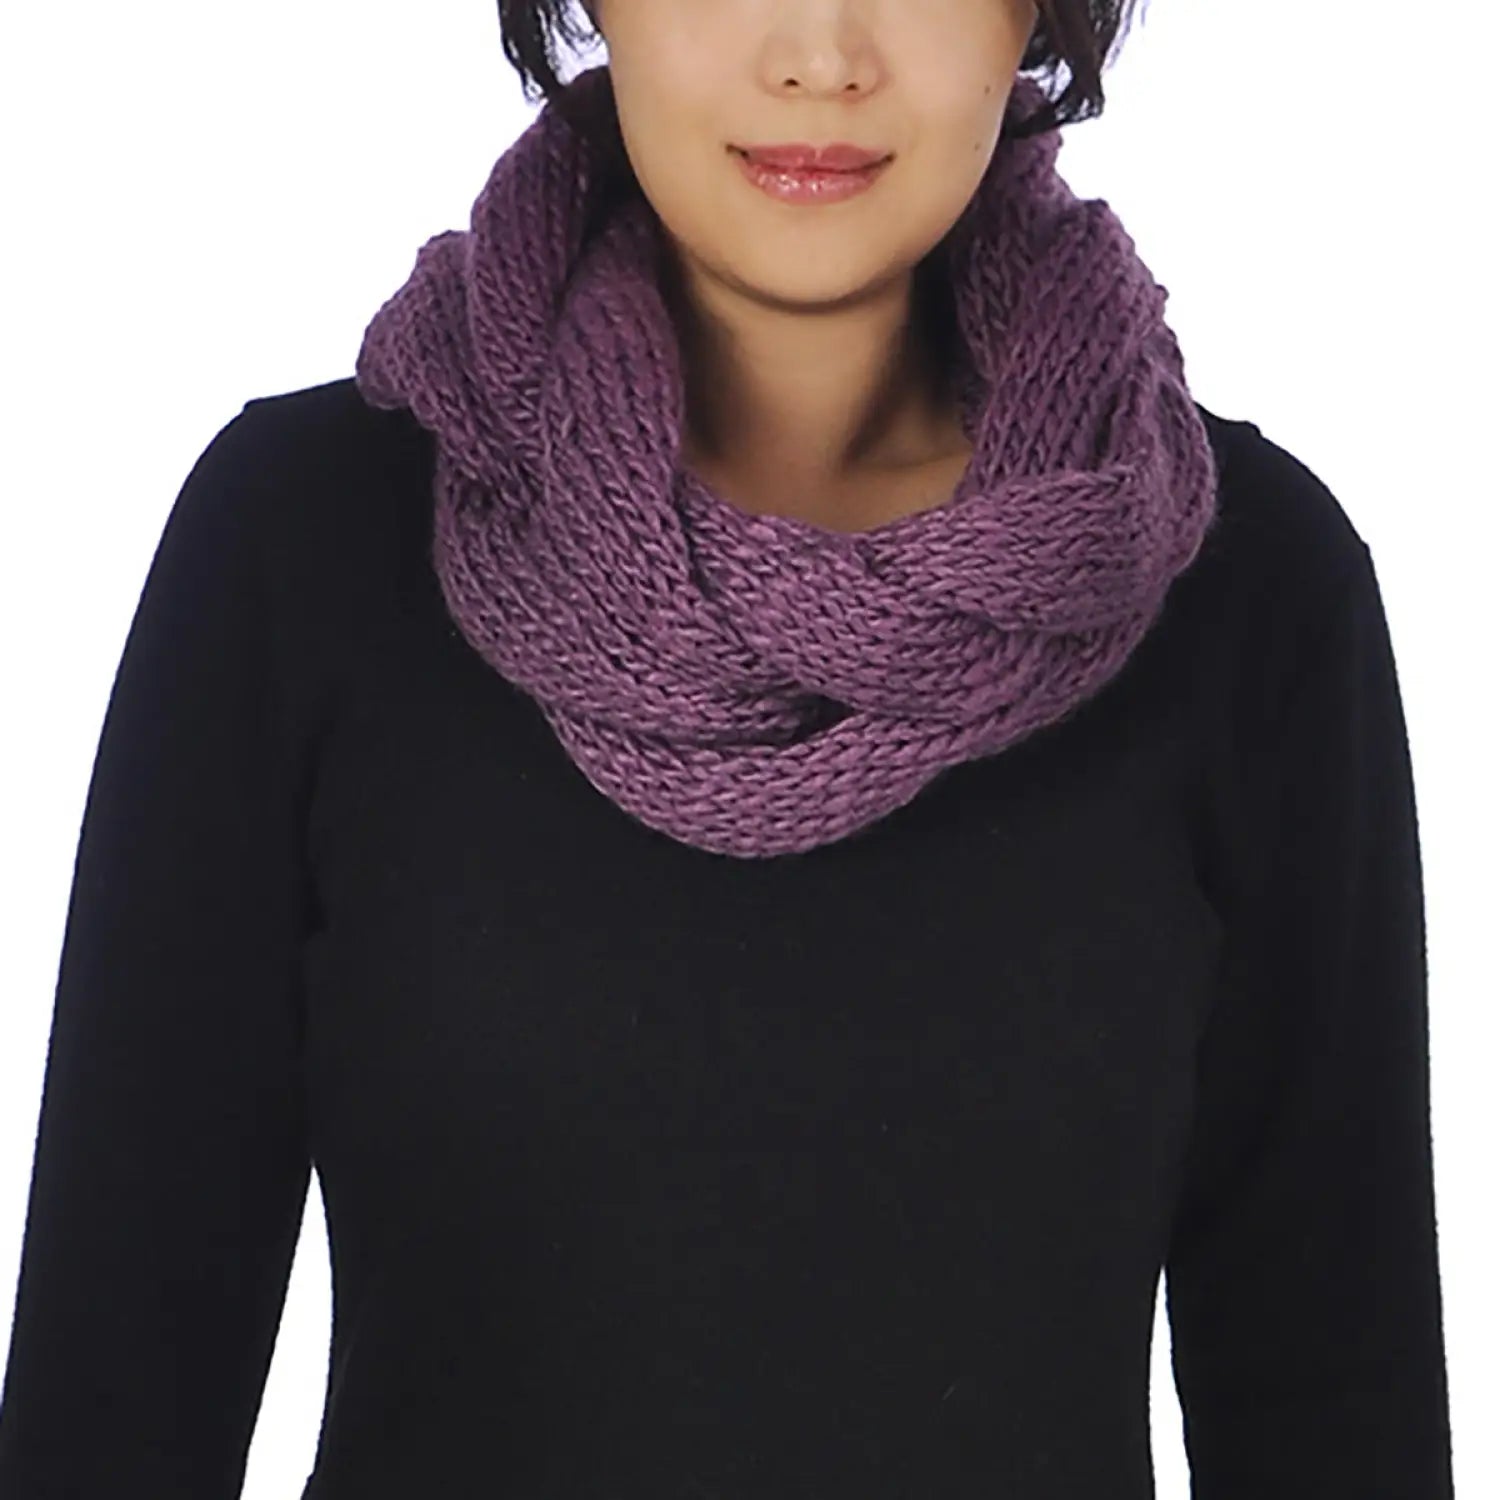 Chunky Plait Knitted Cowl Snood Scarf worn by woman in purple scarf